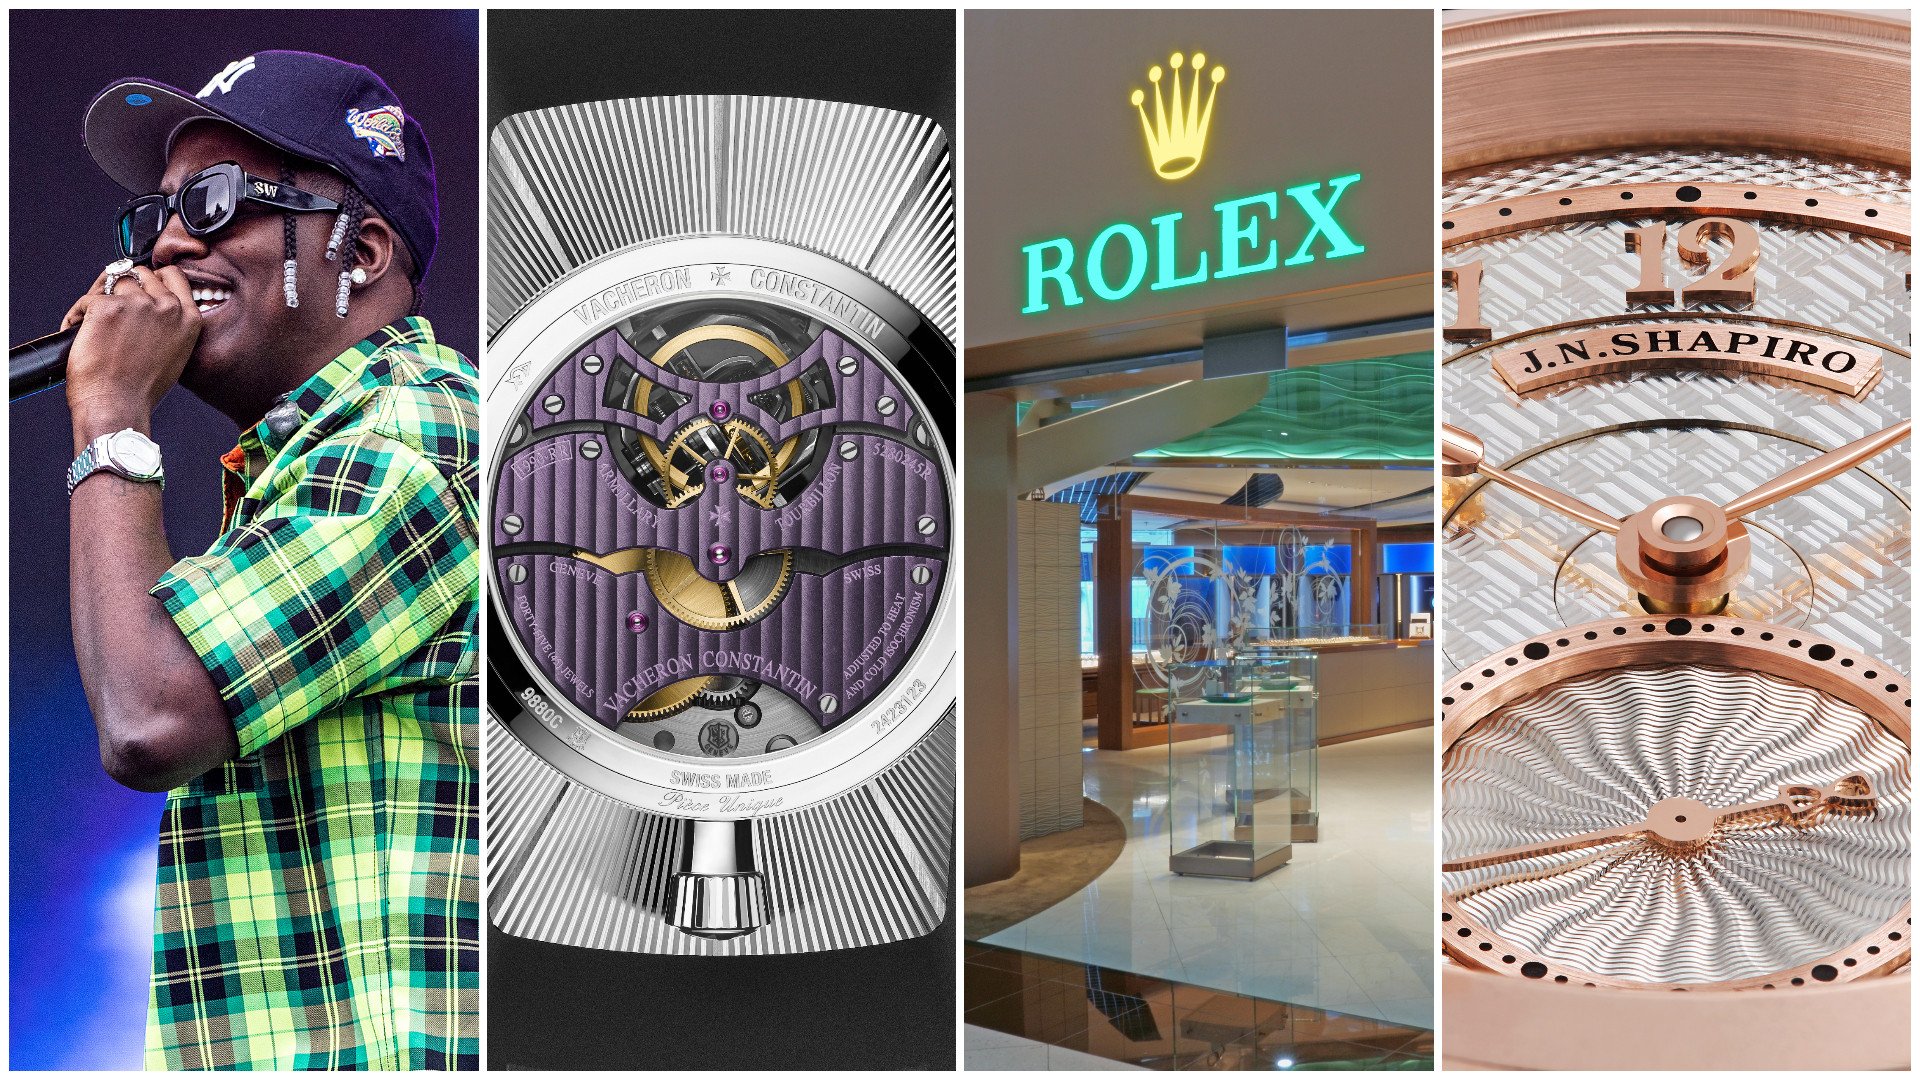 Lil Yachty sports a limited-edition Audemars Piguet collaboration piece; Rolls-Royce adds a Vacheron Constantin to its dashboards; Rolex buys Bucherer to expand its retail reach; and J.N. Shapiro releases a high horology piece built in the US. Photos: AP, Vacheron Constantin, Rolex, J.N. Shapiro